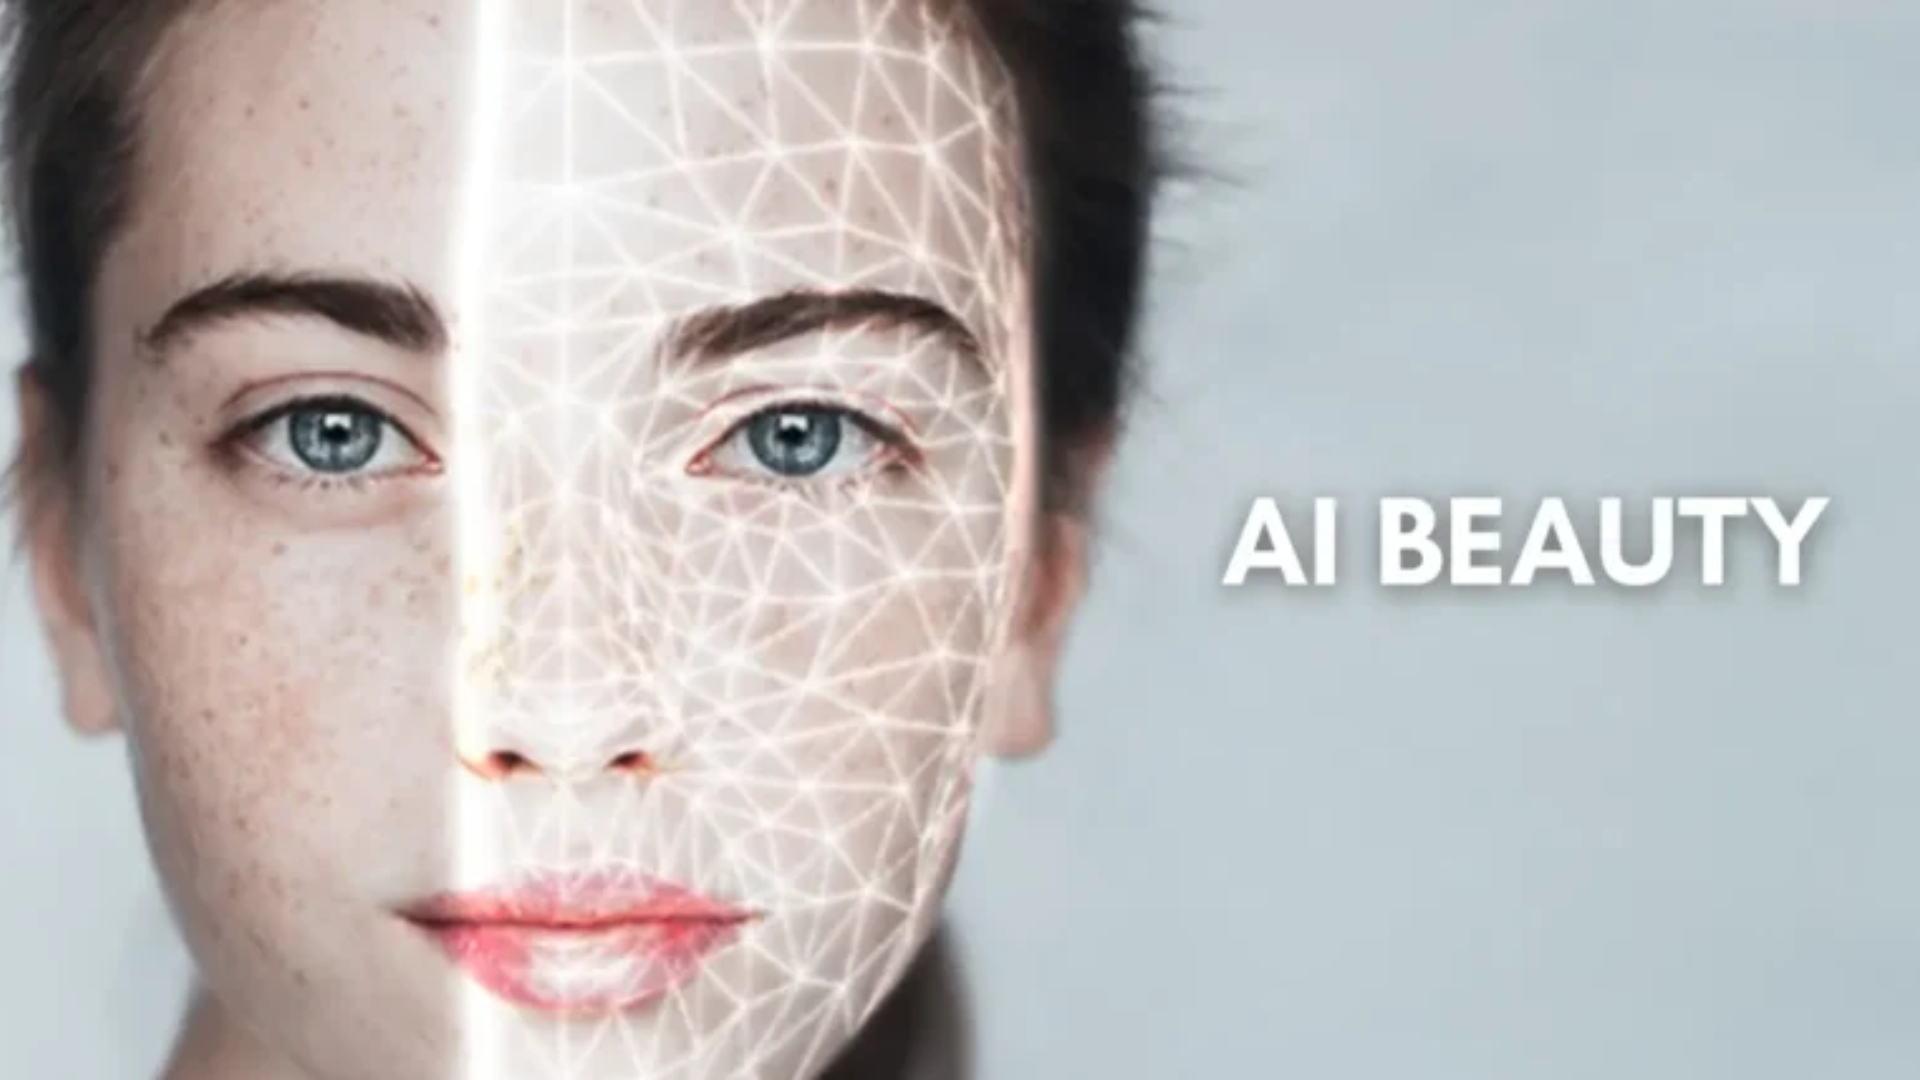 How Attractive Am I? Exploring AI-Powered Beauty Analysis